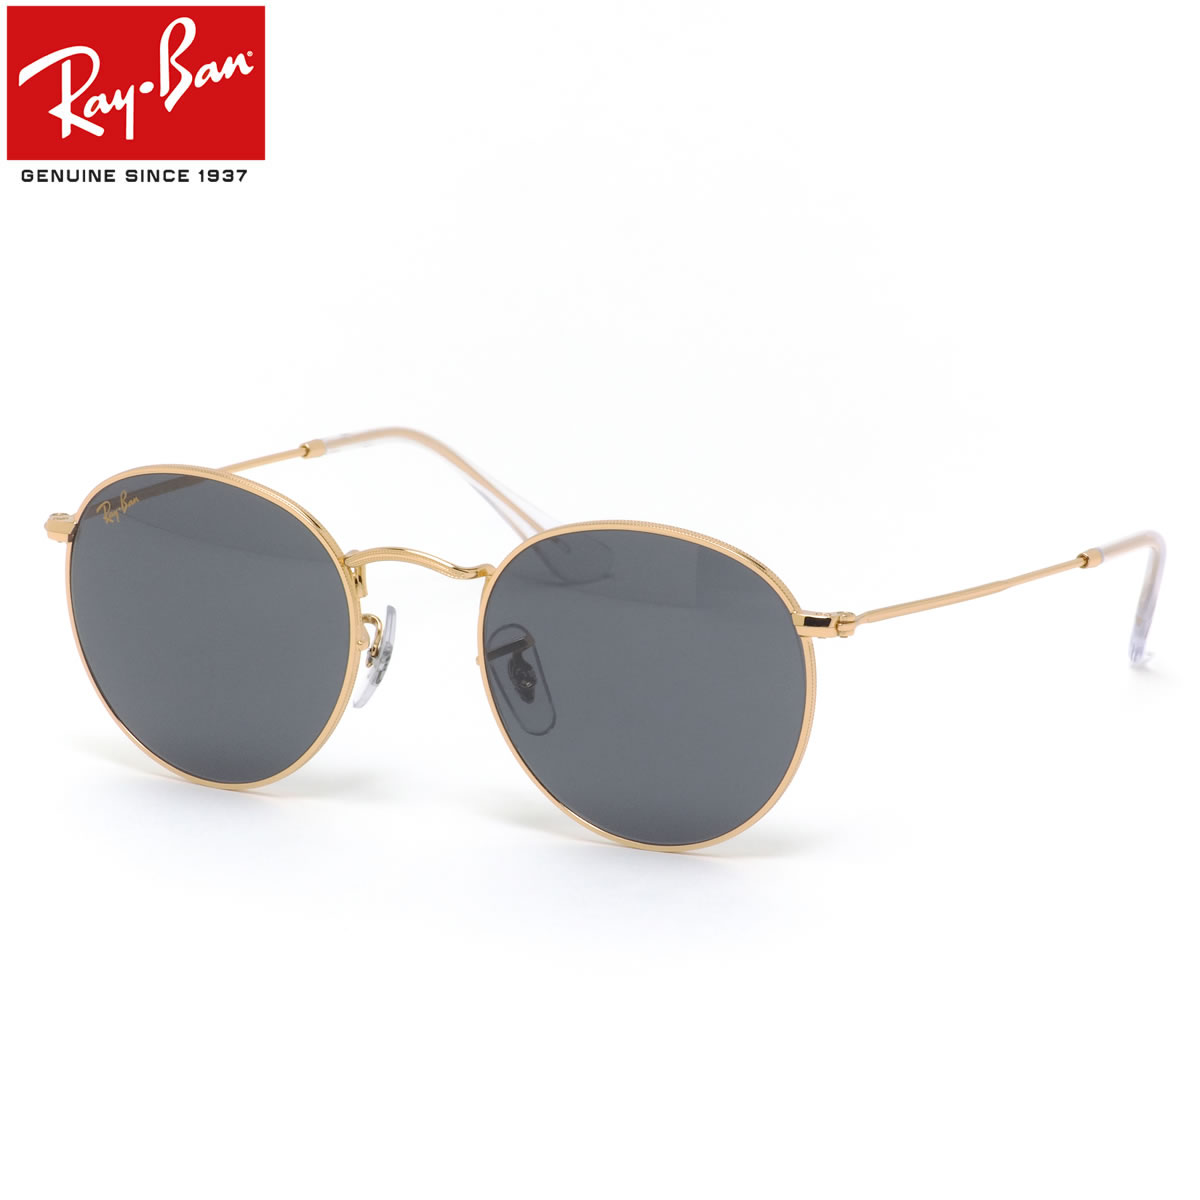 Ray-Ban TOX RB3447 9196R5 47 Co ROUND METAL LEGEND GOLD Eh^WFhS[h S[hS xtΉ Y fB[X